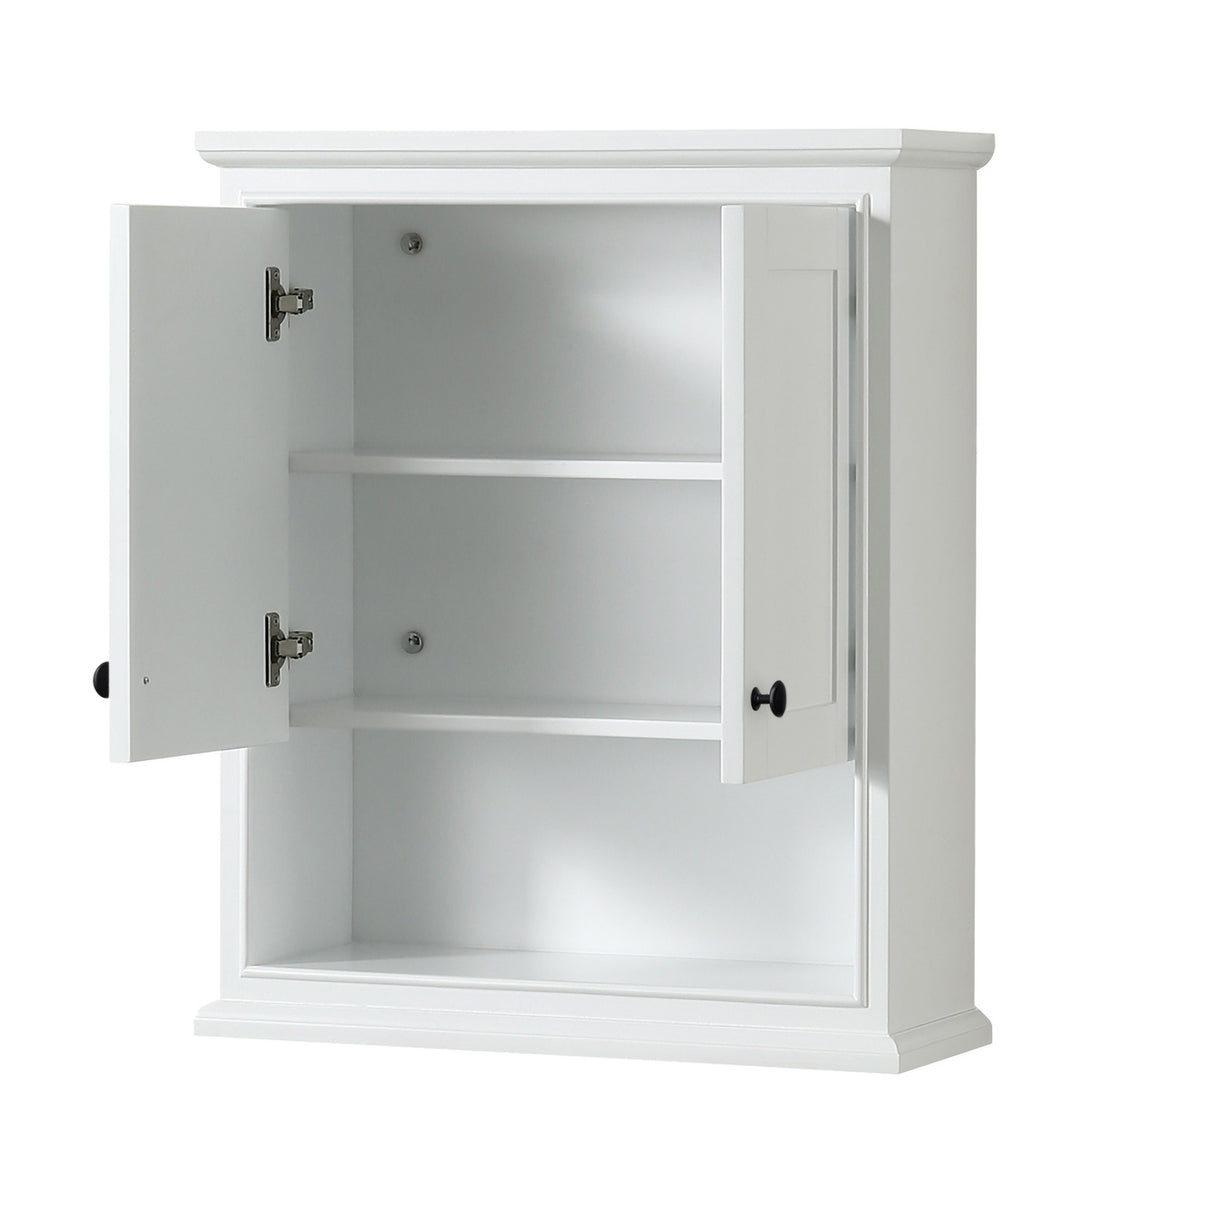 Deborah Over-the-Toilet Bathroom Wall-Mounted Storage Cabinet in White with Matte Black Trim